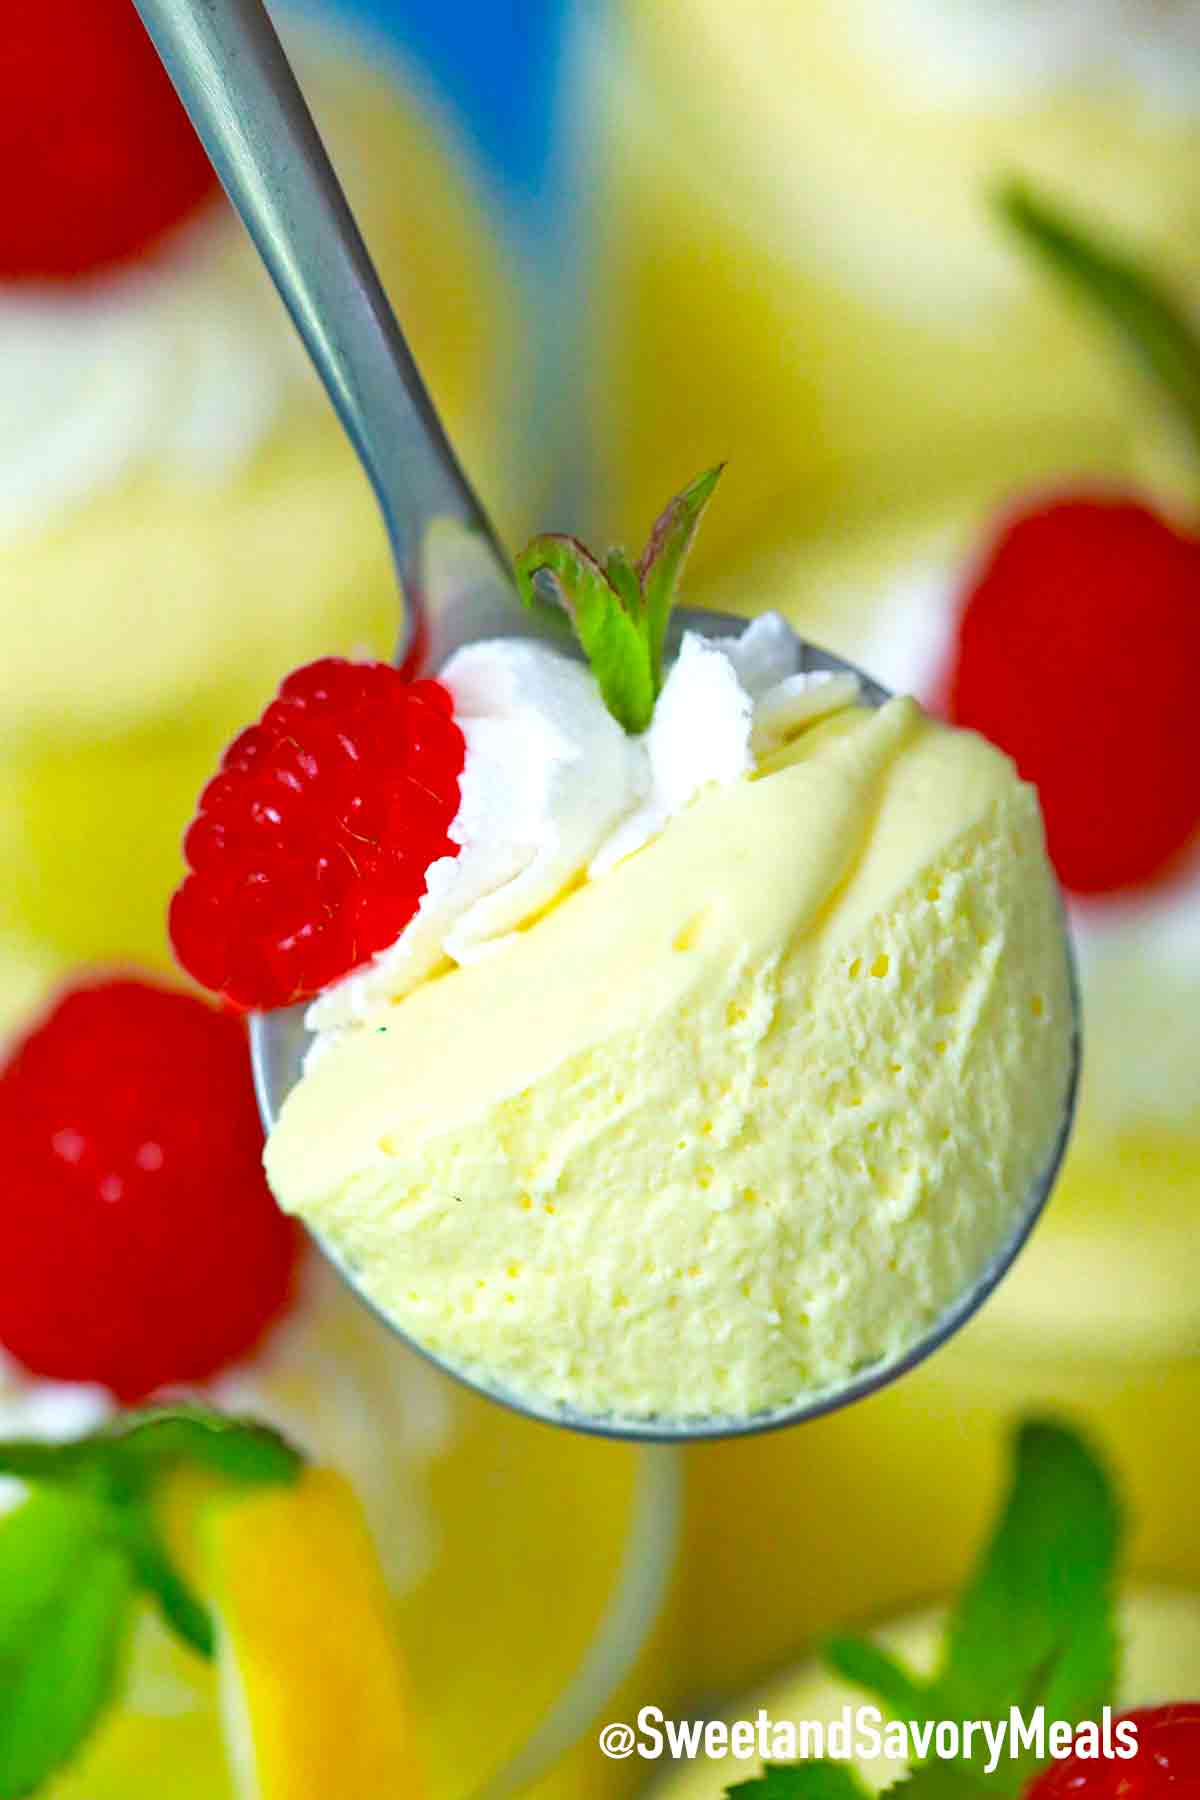 Lemon Mousse Recipe [Video] - Sweet and Savory Meals